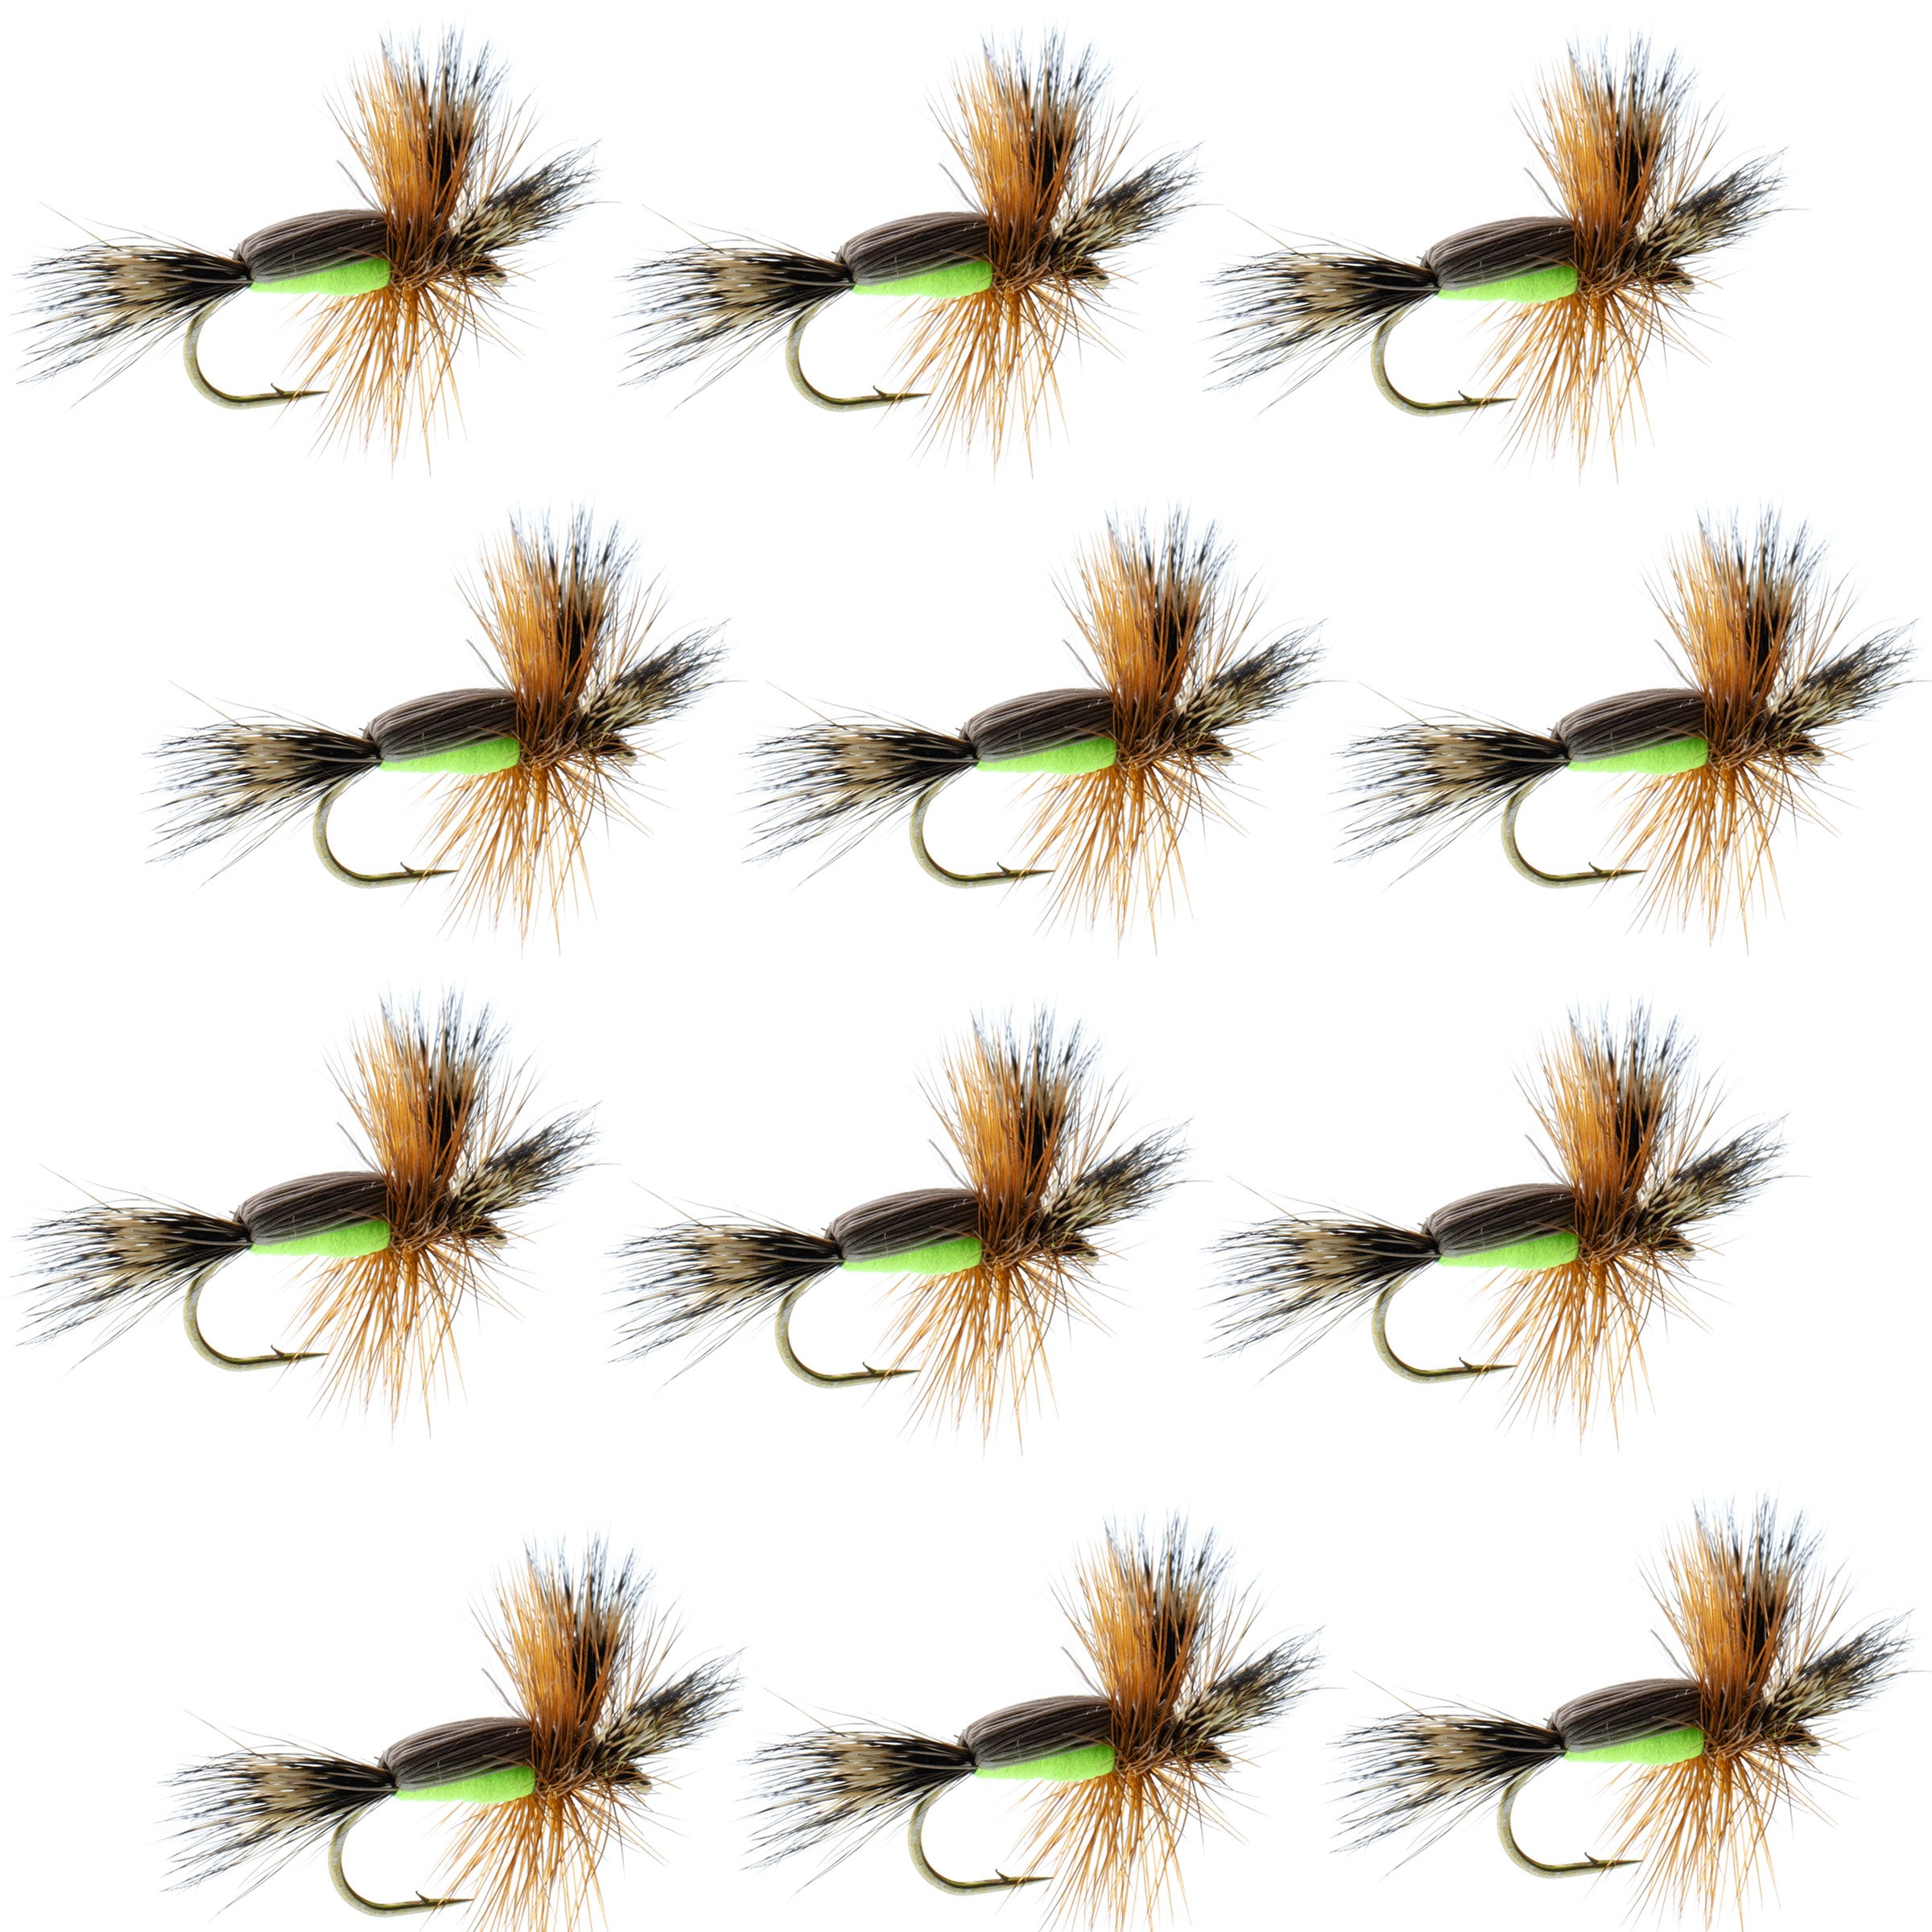 Chartreuse Humpy Classic Hair Wing Dry Fly - 1 Dozen Flies Hook Size 10